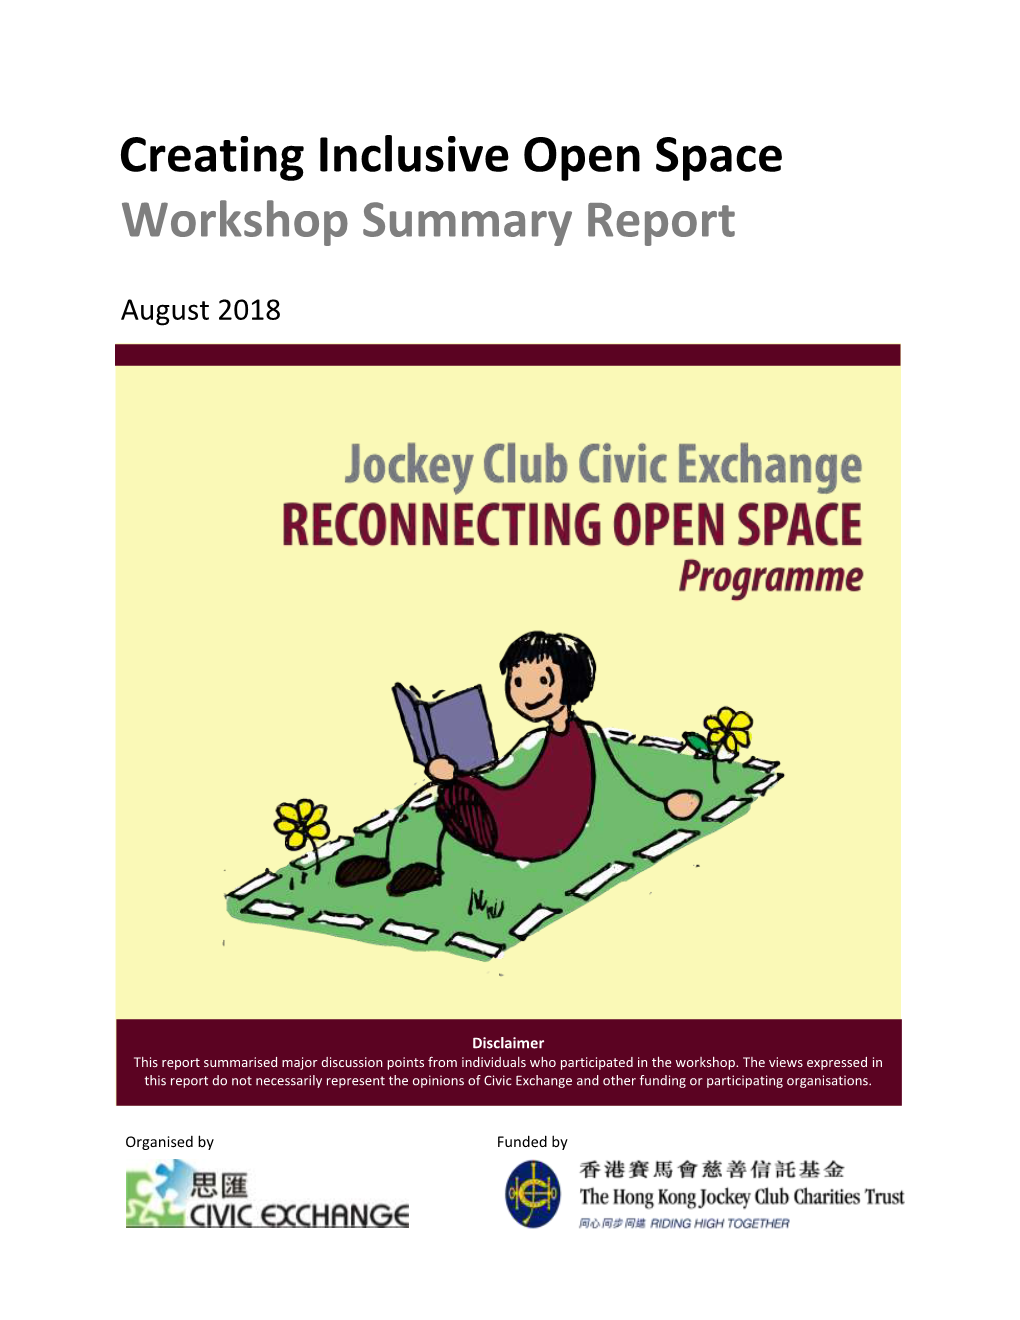 Creating Inclusive Open Space Workshop Summary Report